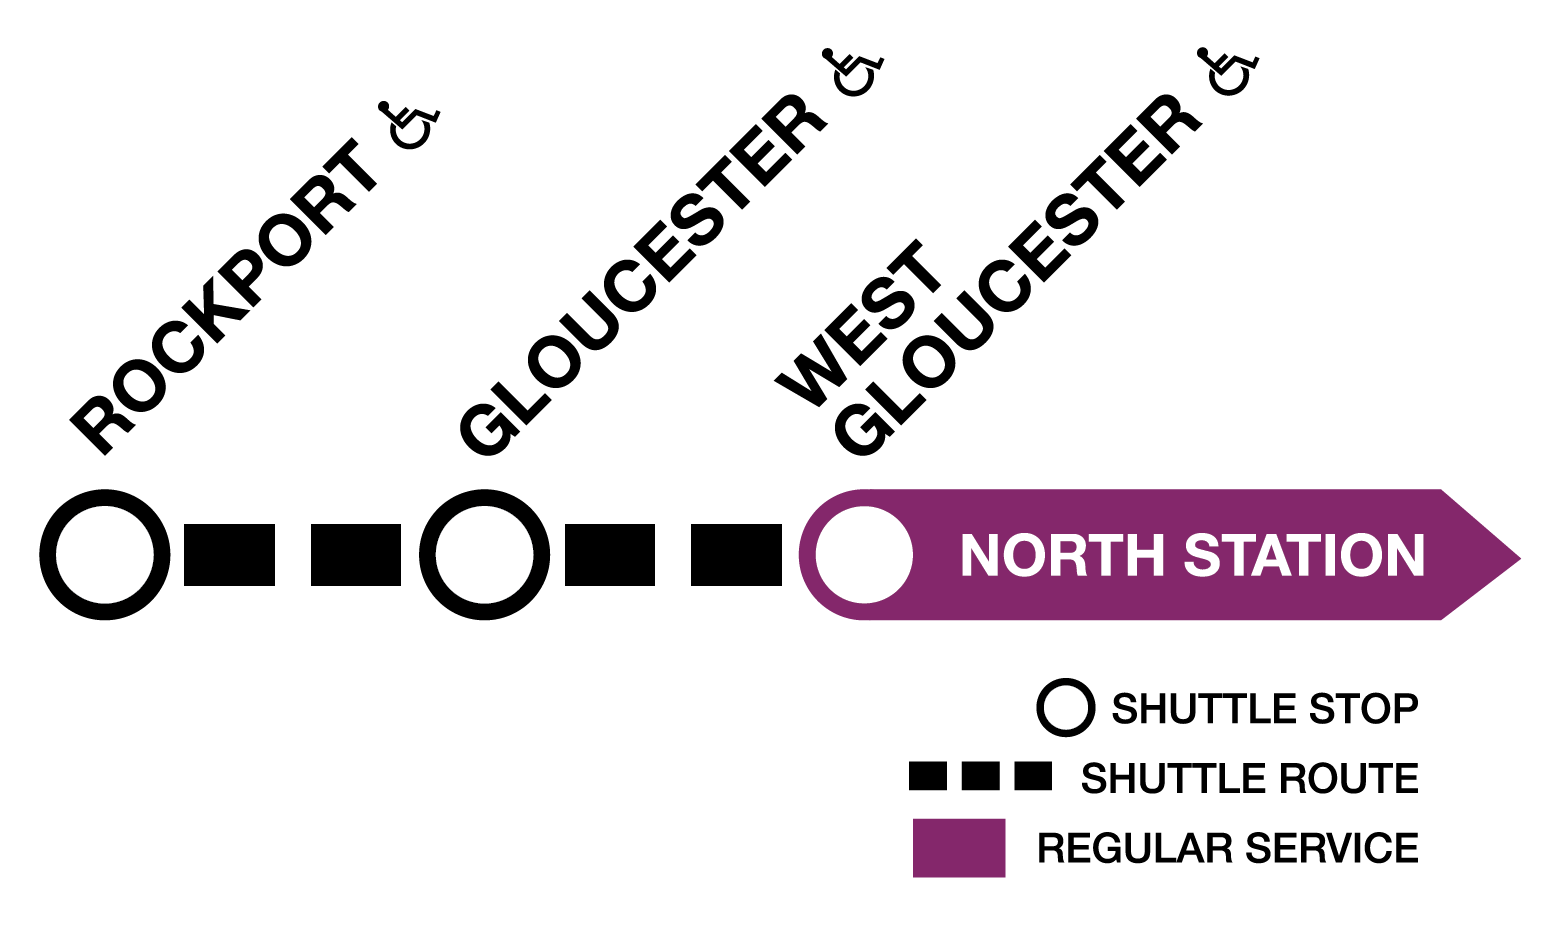 Graphic showing bus shuttle service for Rockport, Gloucester, and West Gloucester. Train service resumes at West Gloucester inbound.